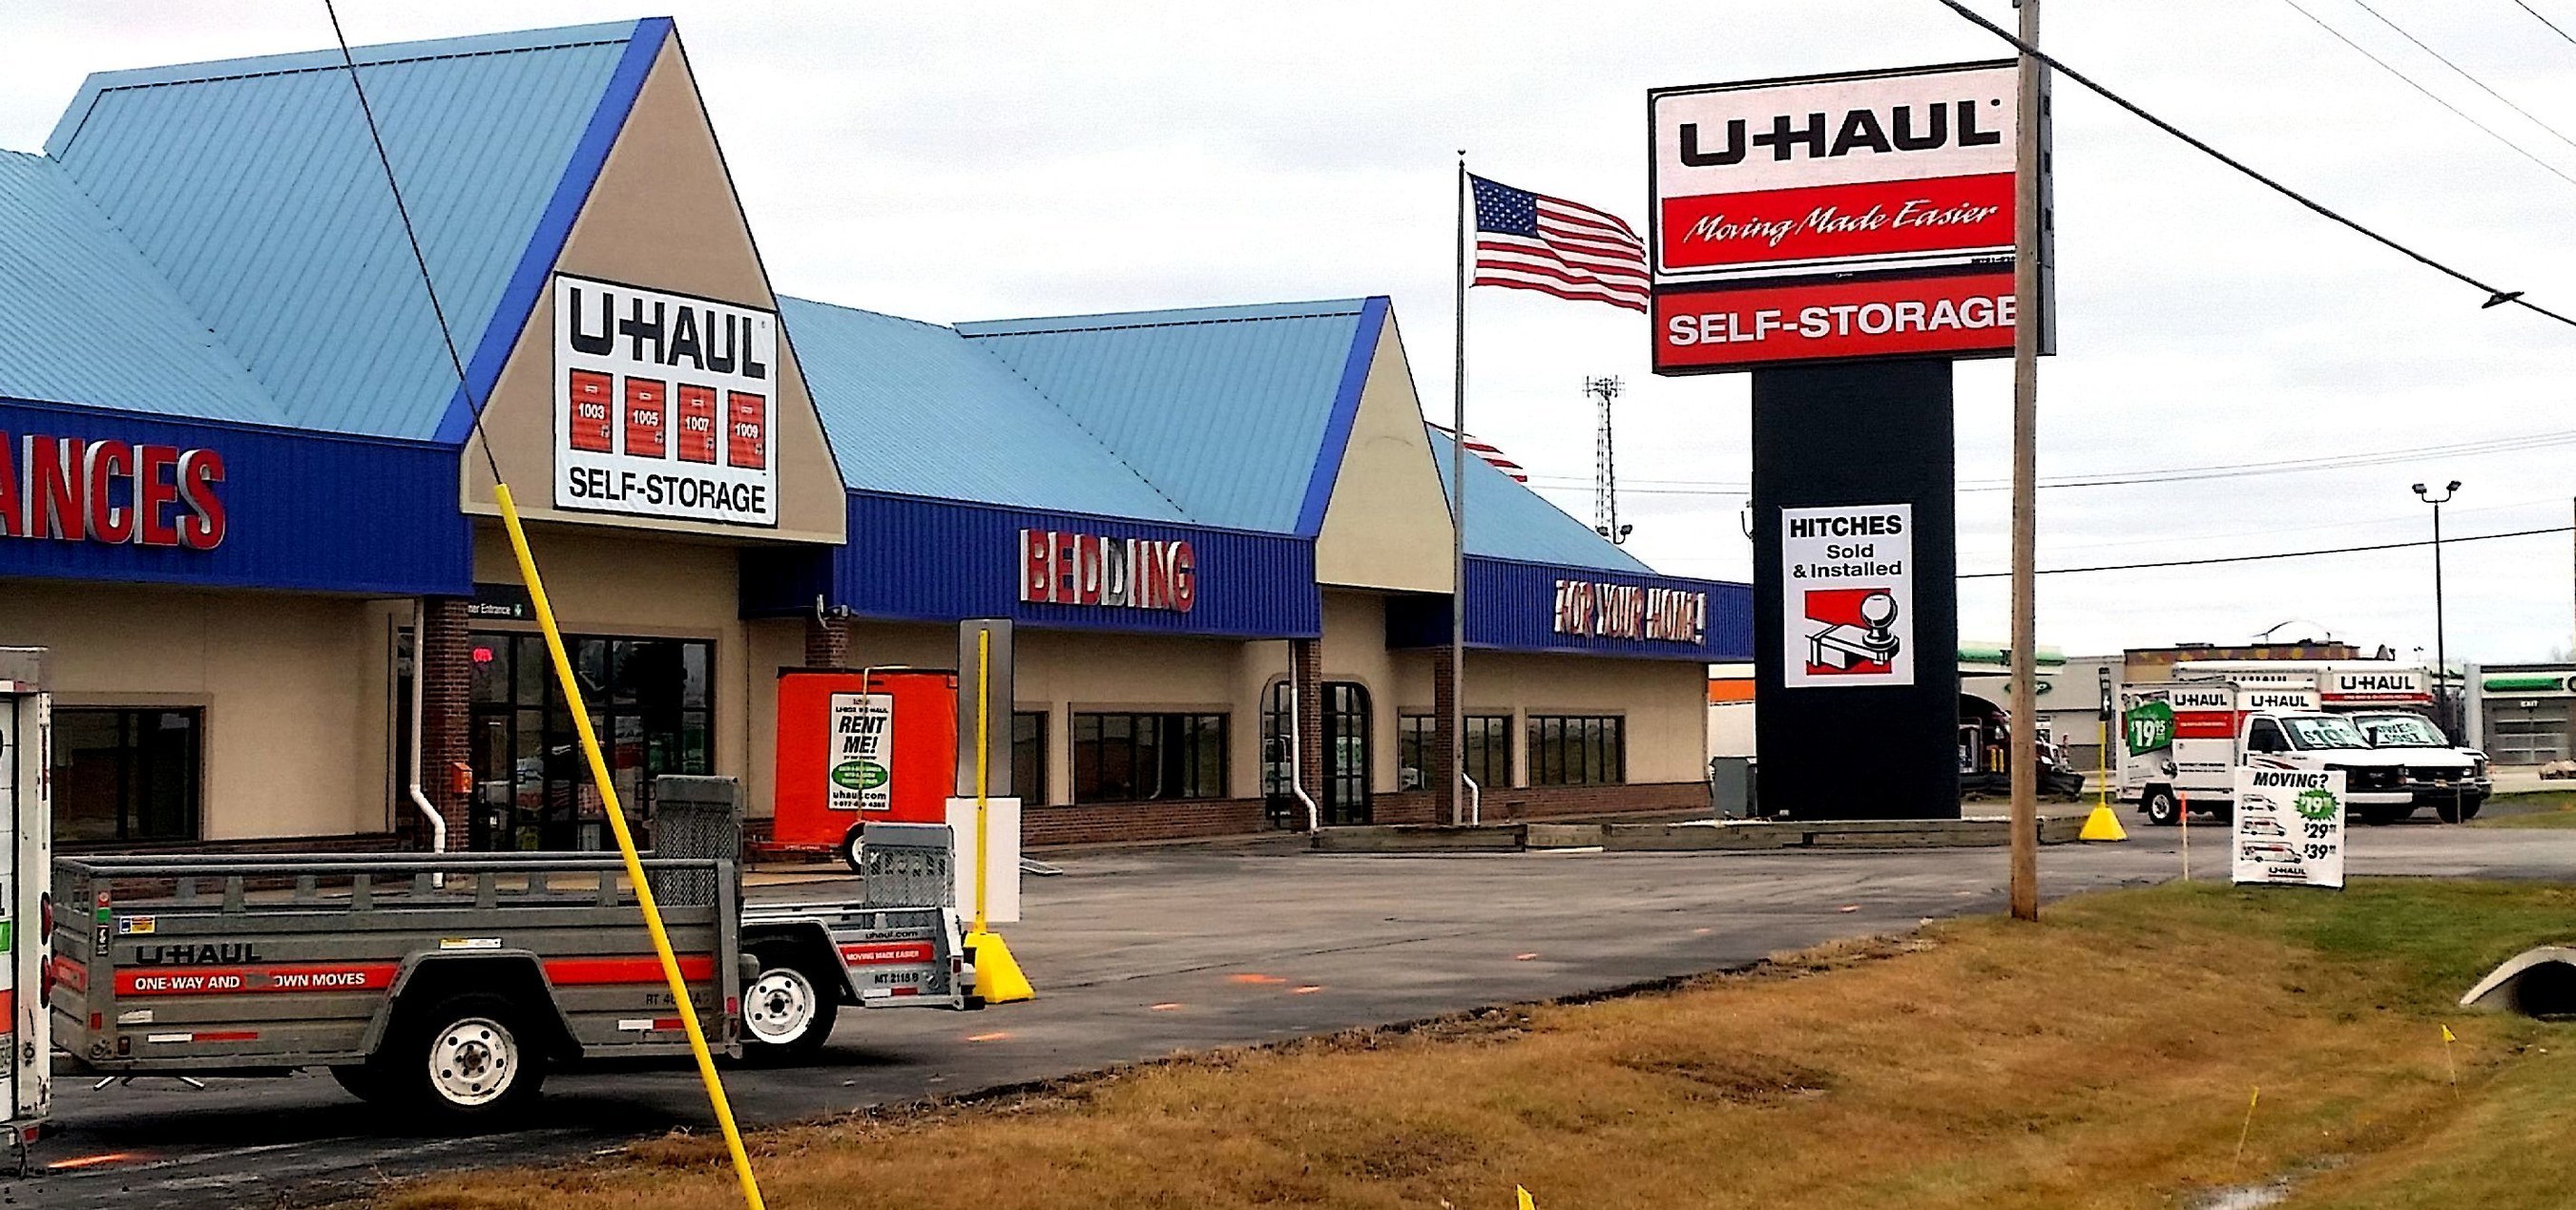 U-Haul sustainability practices have led to the acquisition and conversion of a former furniture and appliance store to a full-service moving and storage facility just south of Green Bay.